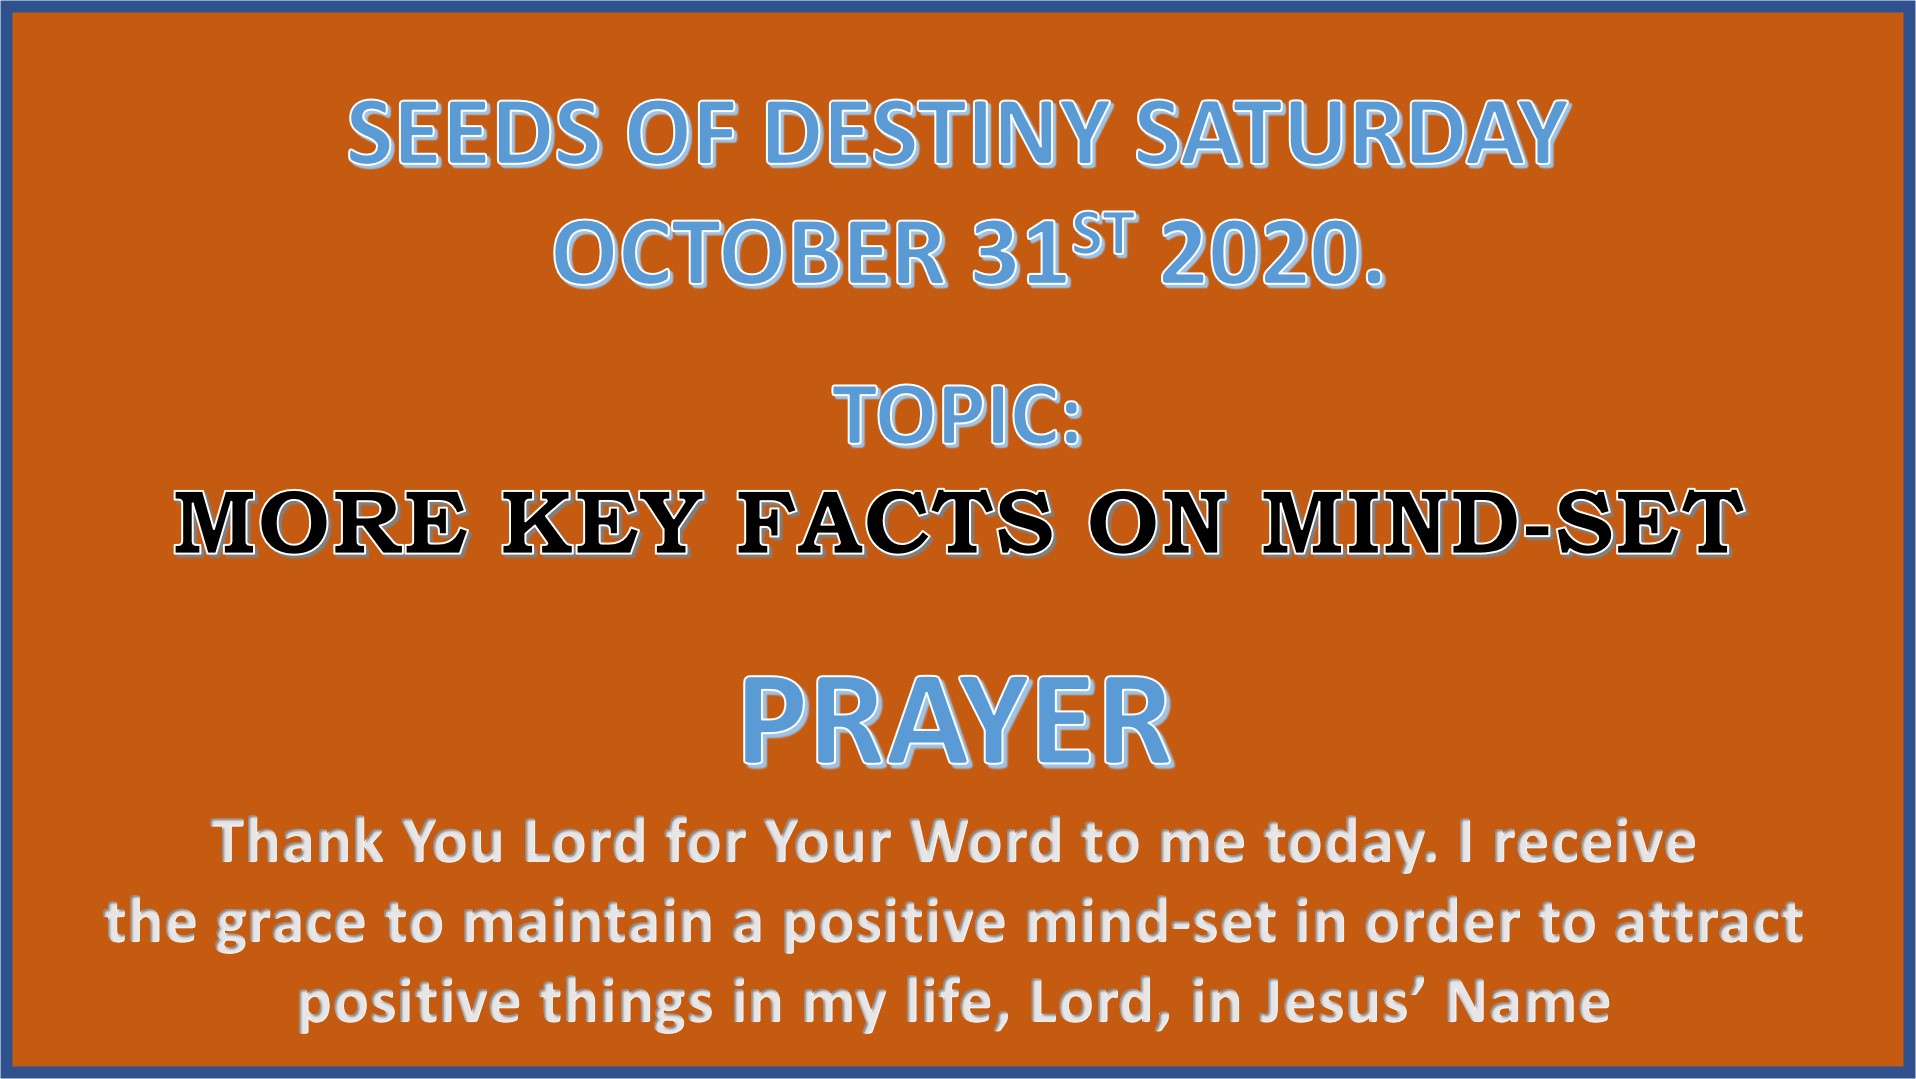 Seeds of Destiny Saturday 31st October 2020 by Dr Paul Enenche